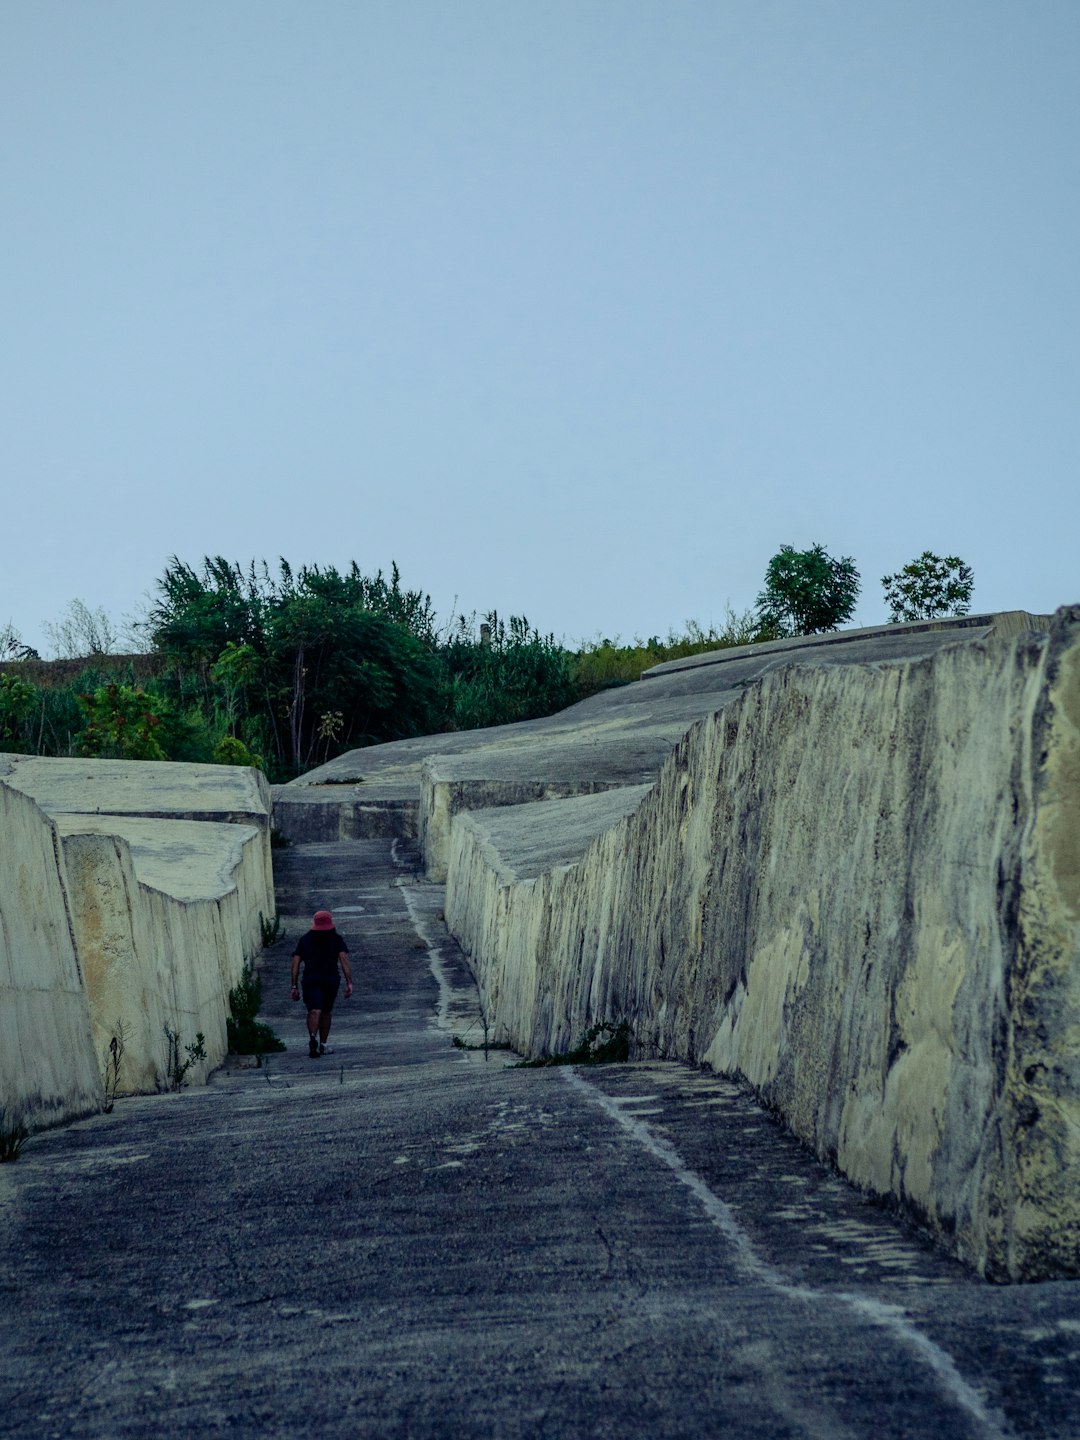 a person walking down a road next to a stone wall